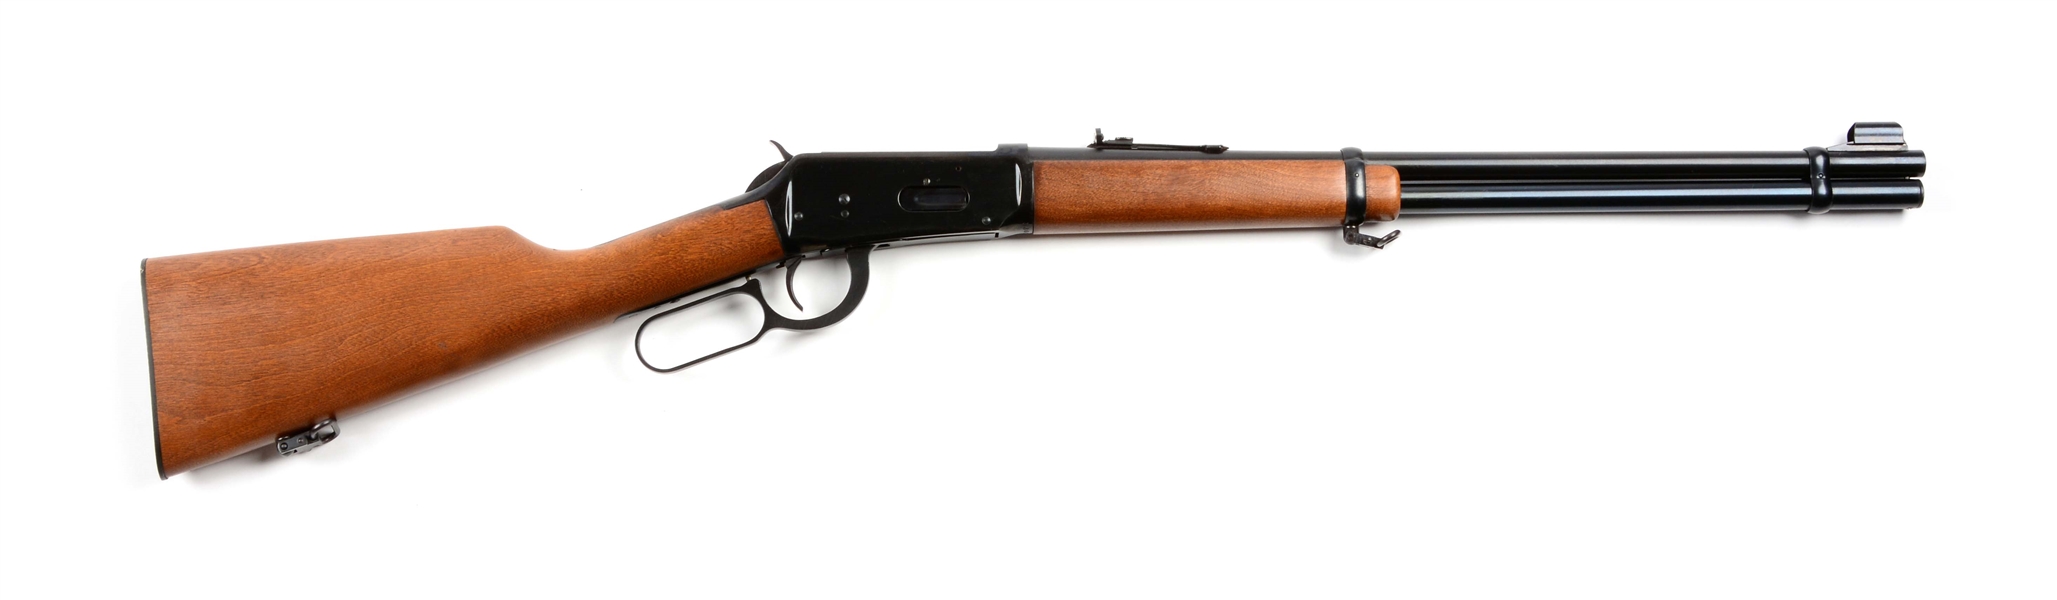 (M) WINCHESTER MODEL 1894 LEVER ACTION CARBINE RIFLE.